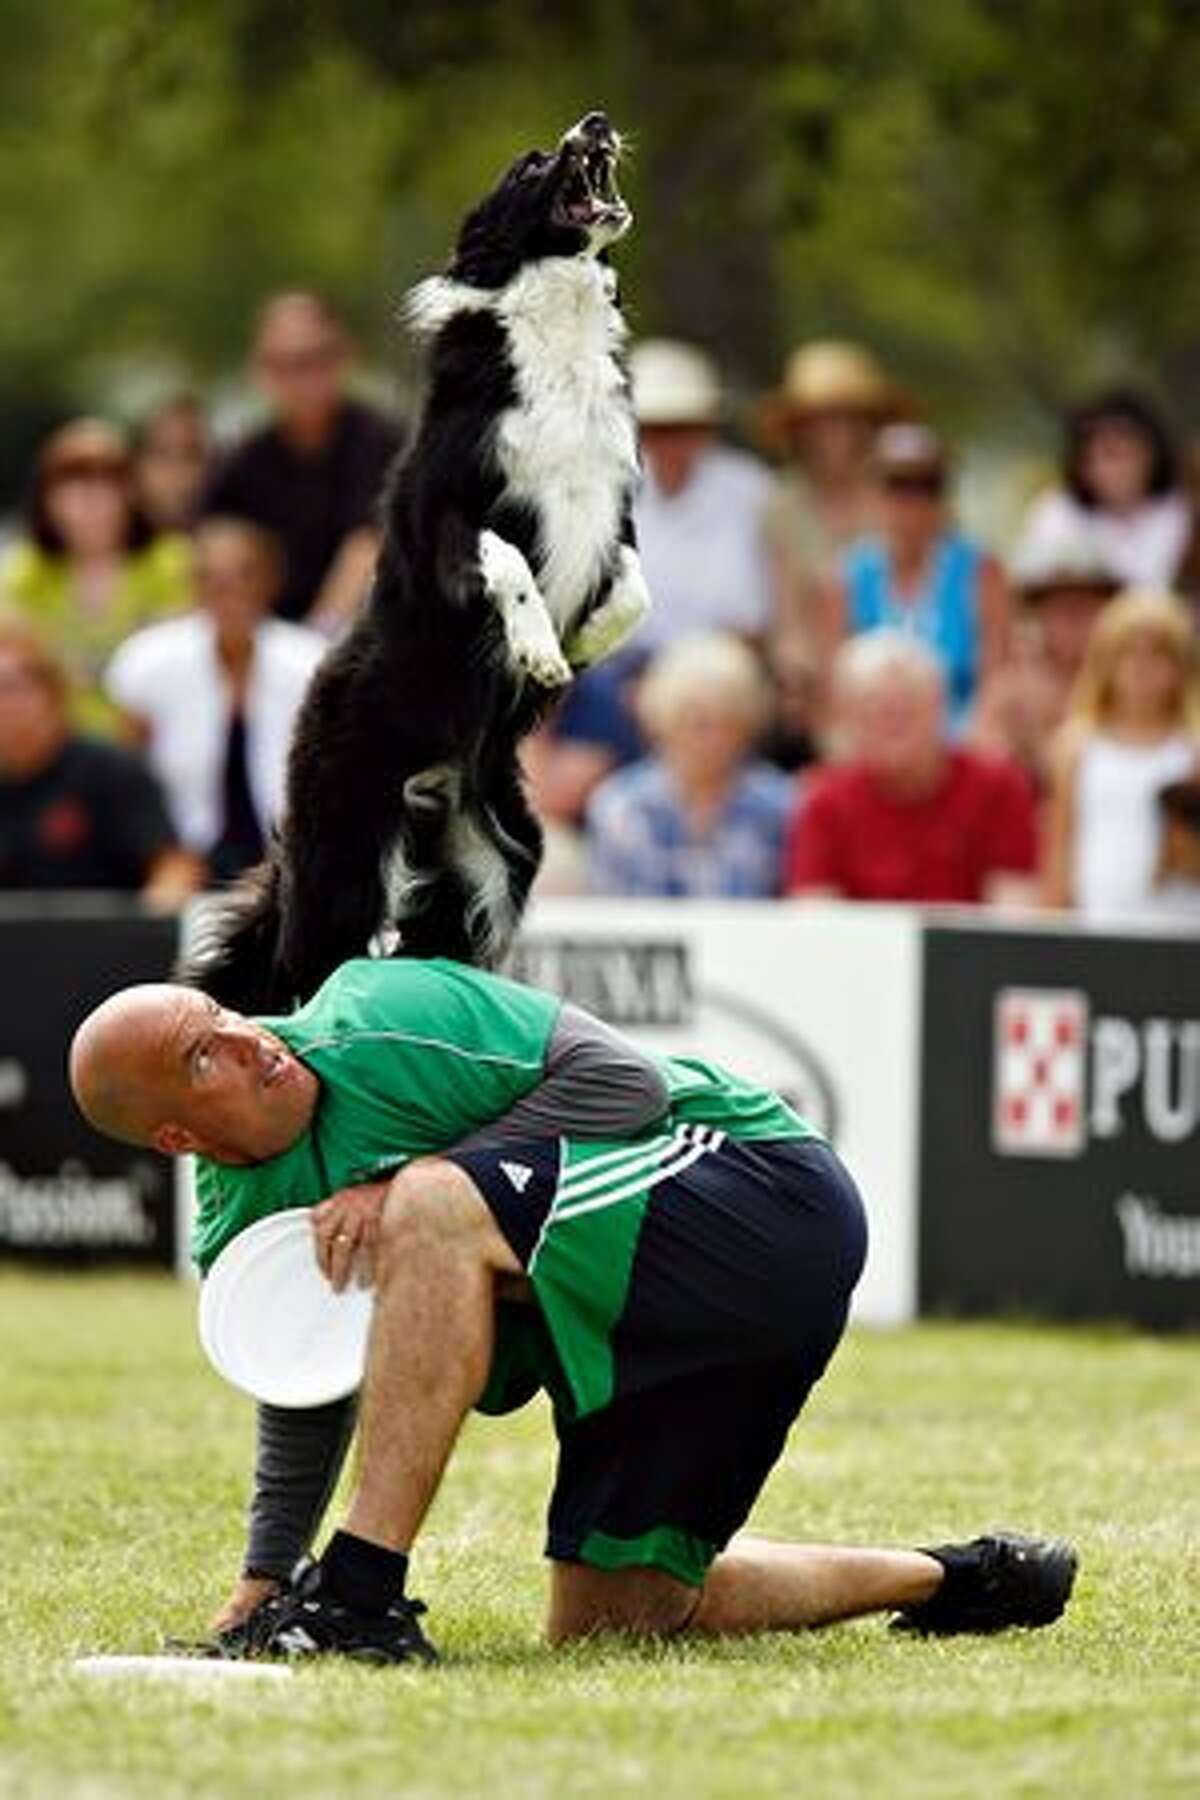 Rocket, a 6-year-old Border Collie does a back vault off his owner Mark Muir of Williamson, Ga. during practice for the flying disc competition at The Purina Incredible Dog Challenge on Friday, April 16, 2010, in St. Petersburg, Fla.(AP Photo/St. Petersburg Times, Melissa Lyttle)